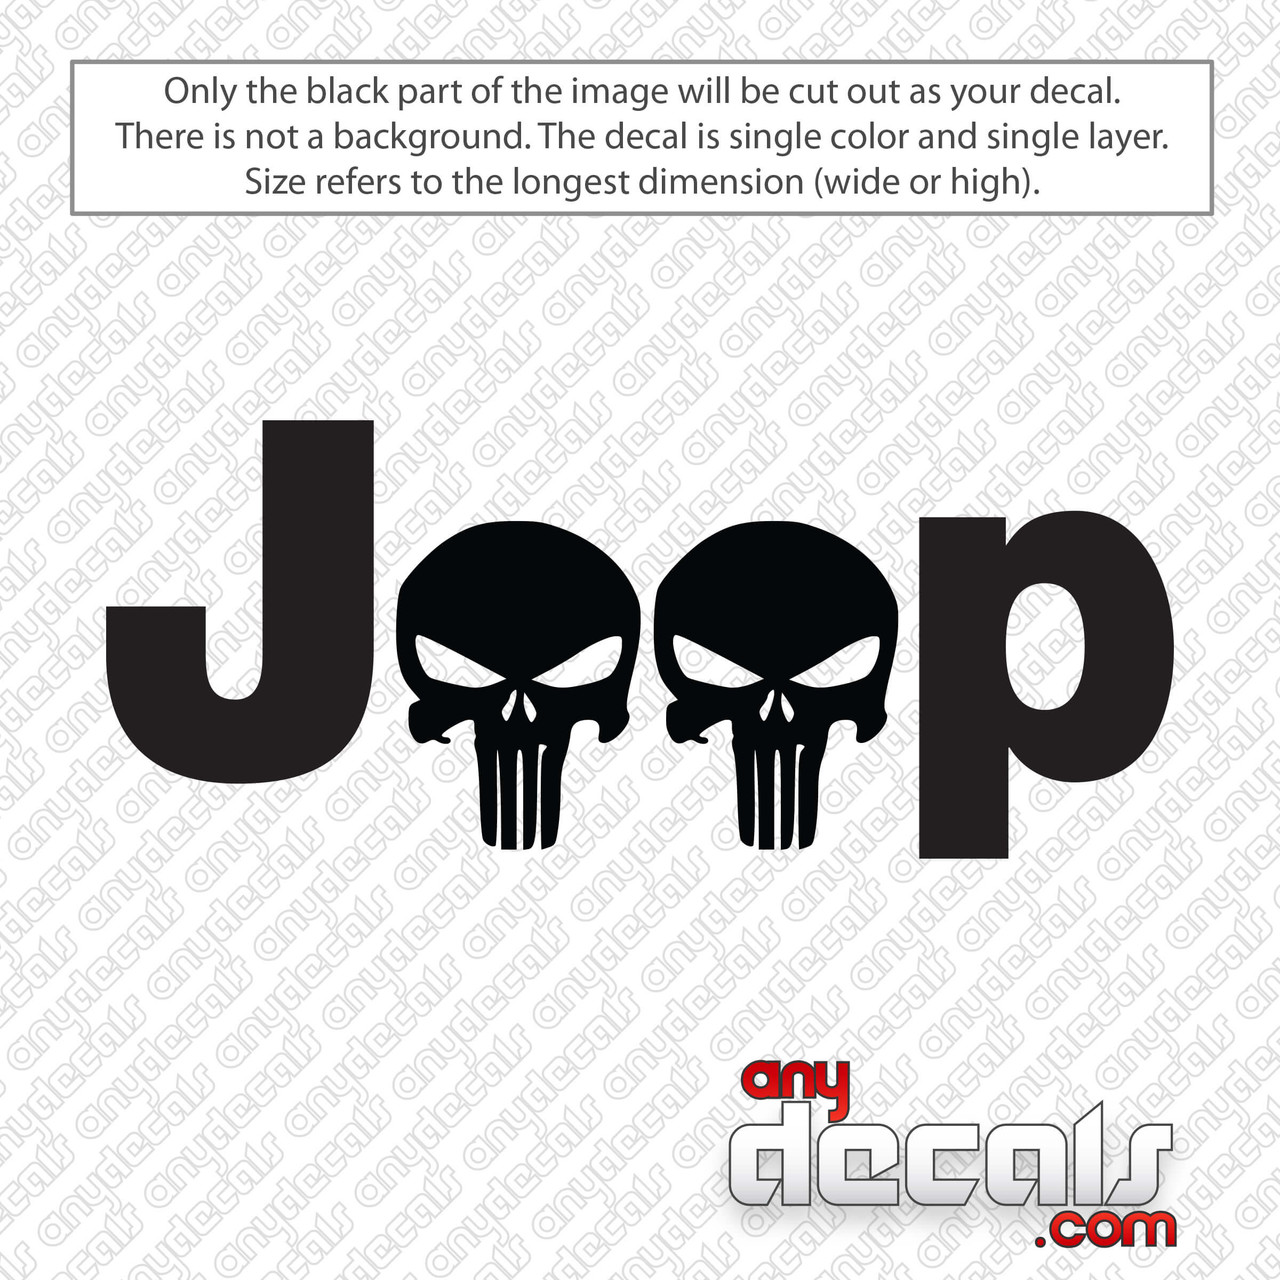 https://cdn11.bigcommerce.com/s-df97c/images/stencil/1280x1280/products/1234/2251/jeep-punisher-skull-decal-sticker__40549.1600578129.jpg?c=2?imbypass=on